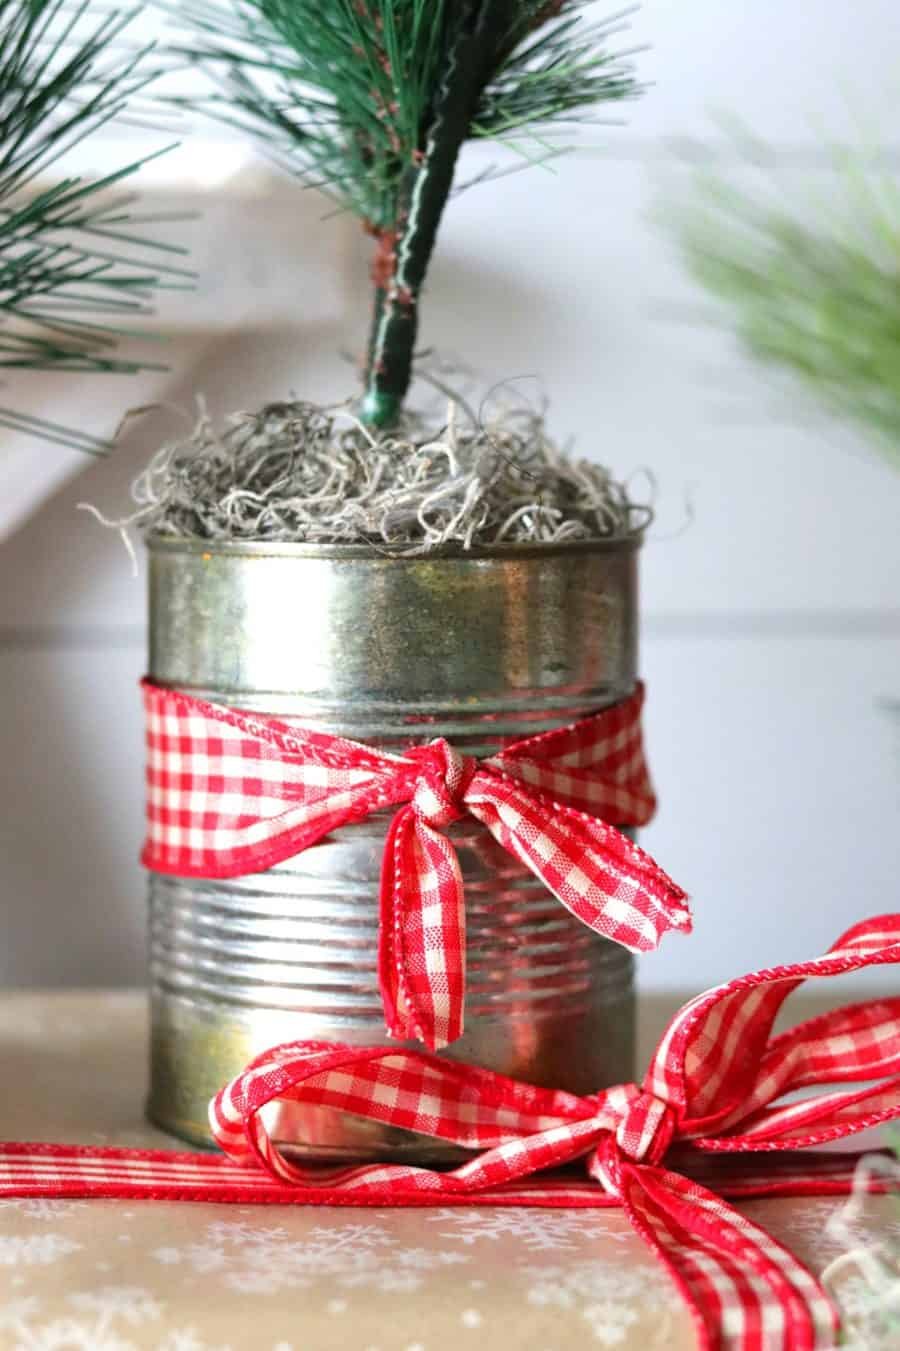 A festive tin can adorned with a miniature Christmas tree, bringing holiday cheer in a compact display.